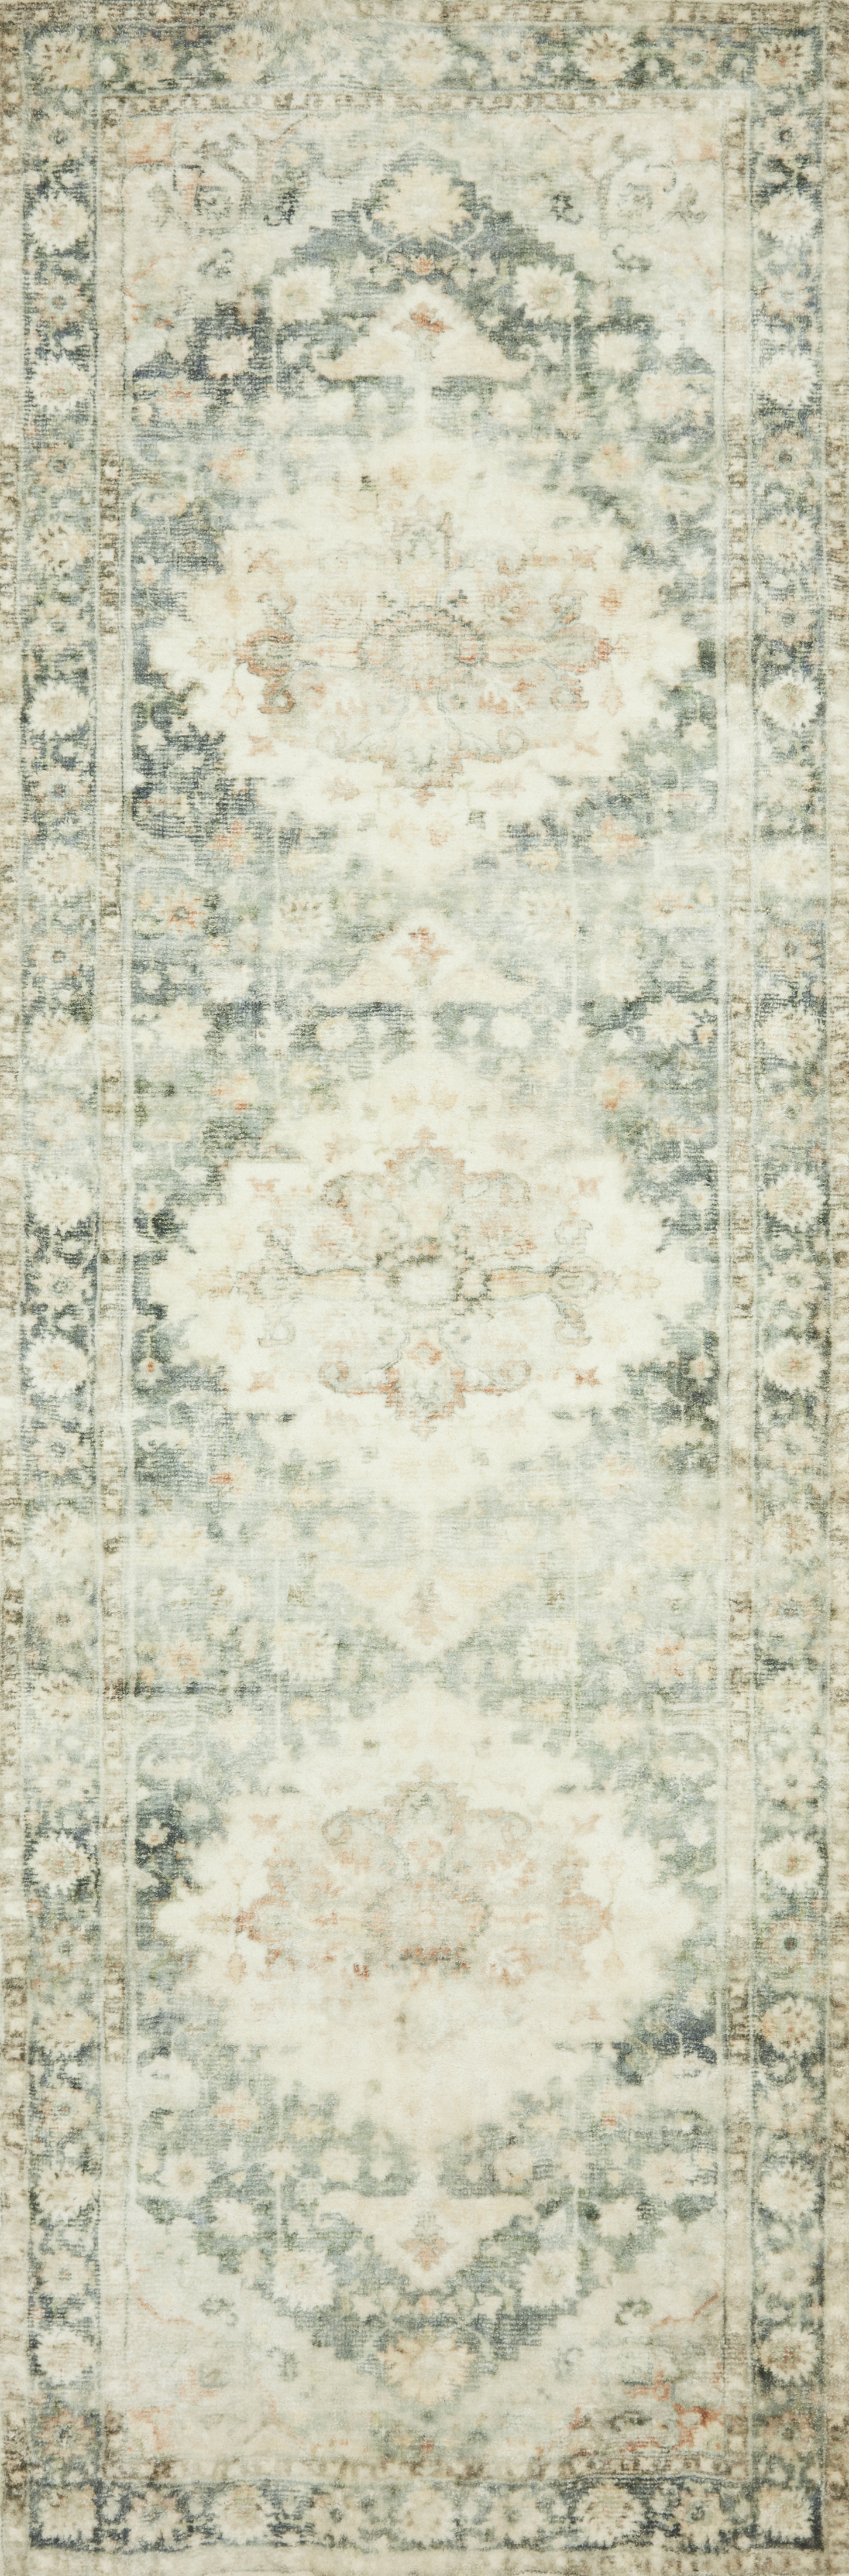 Rosette ROS-08 Teal / Ivory 2'-6" x 9'-9" - Image 2